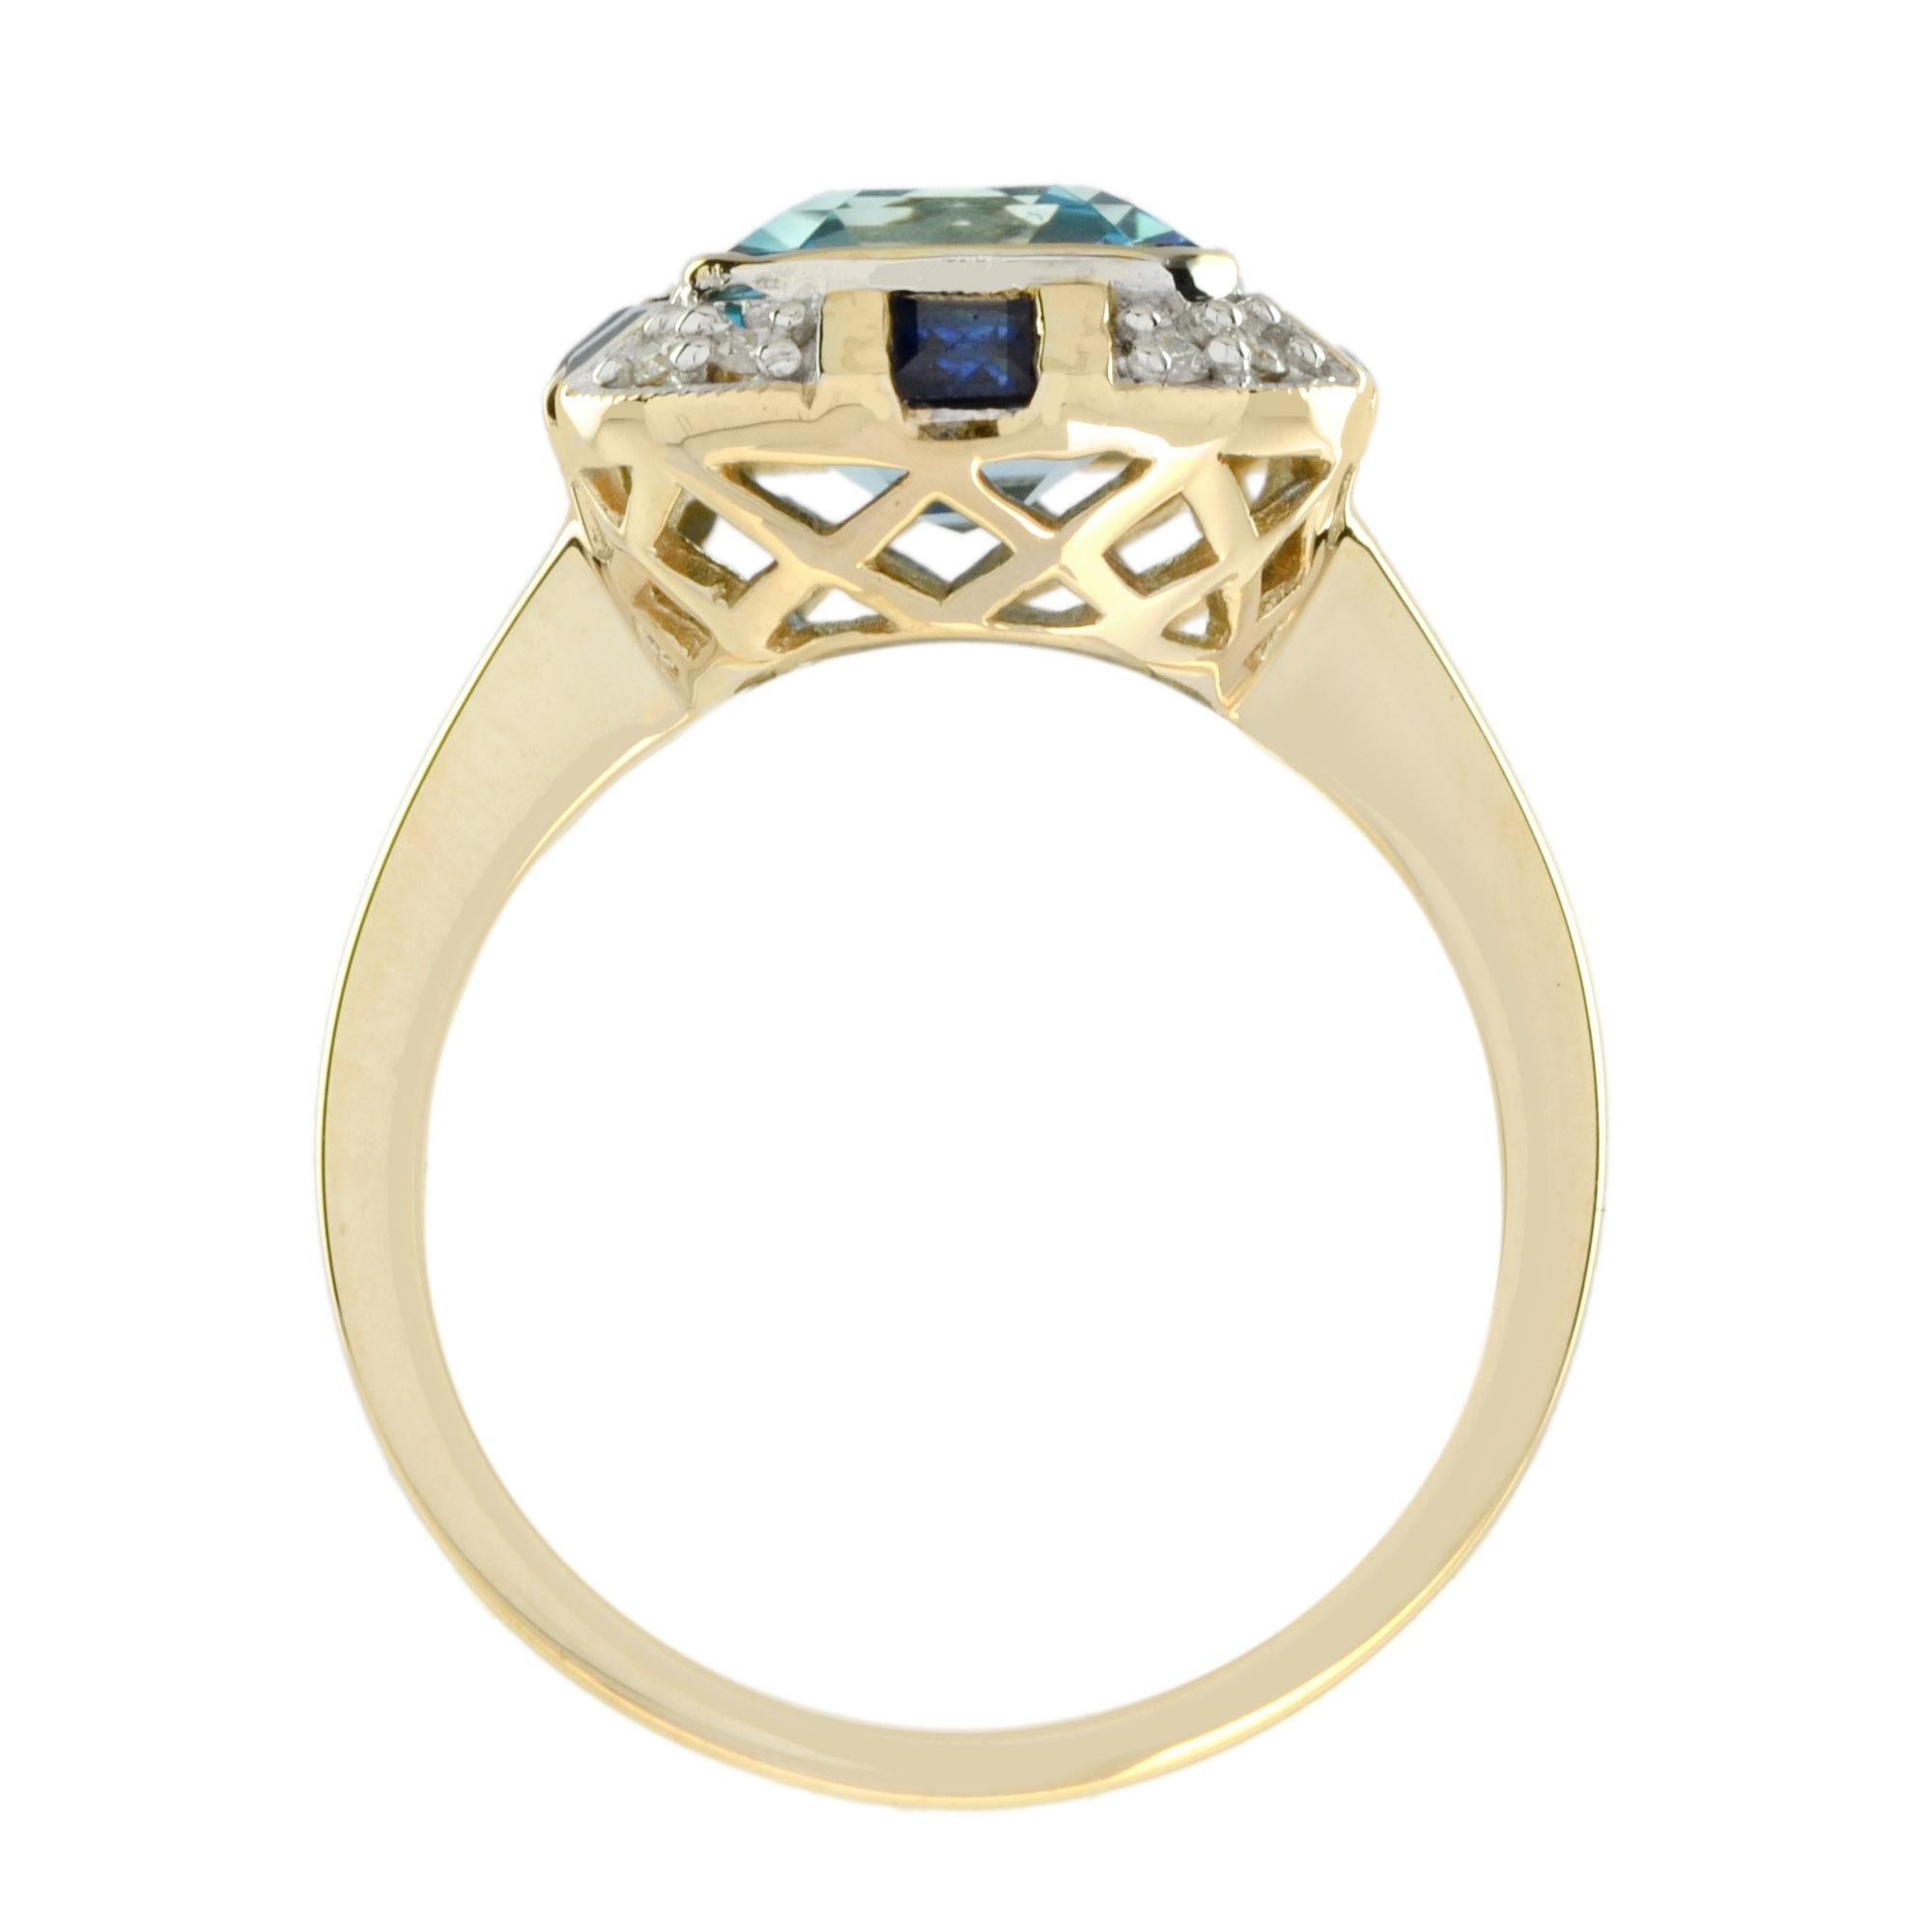 For Sale:  Art Deco Style Blue Topaz Sapphire and Diamond Ring in White Top Yellow Gold 6